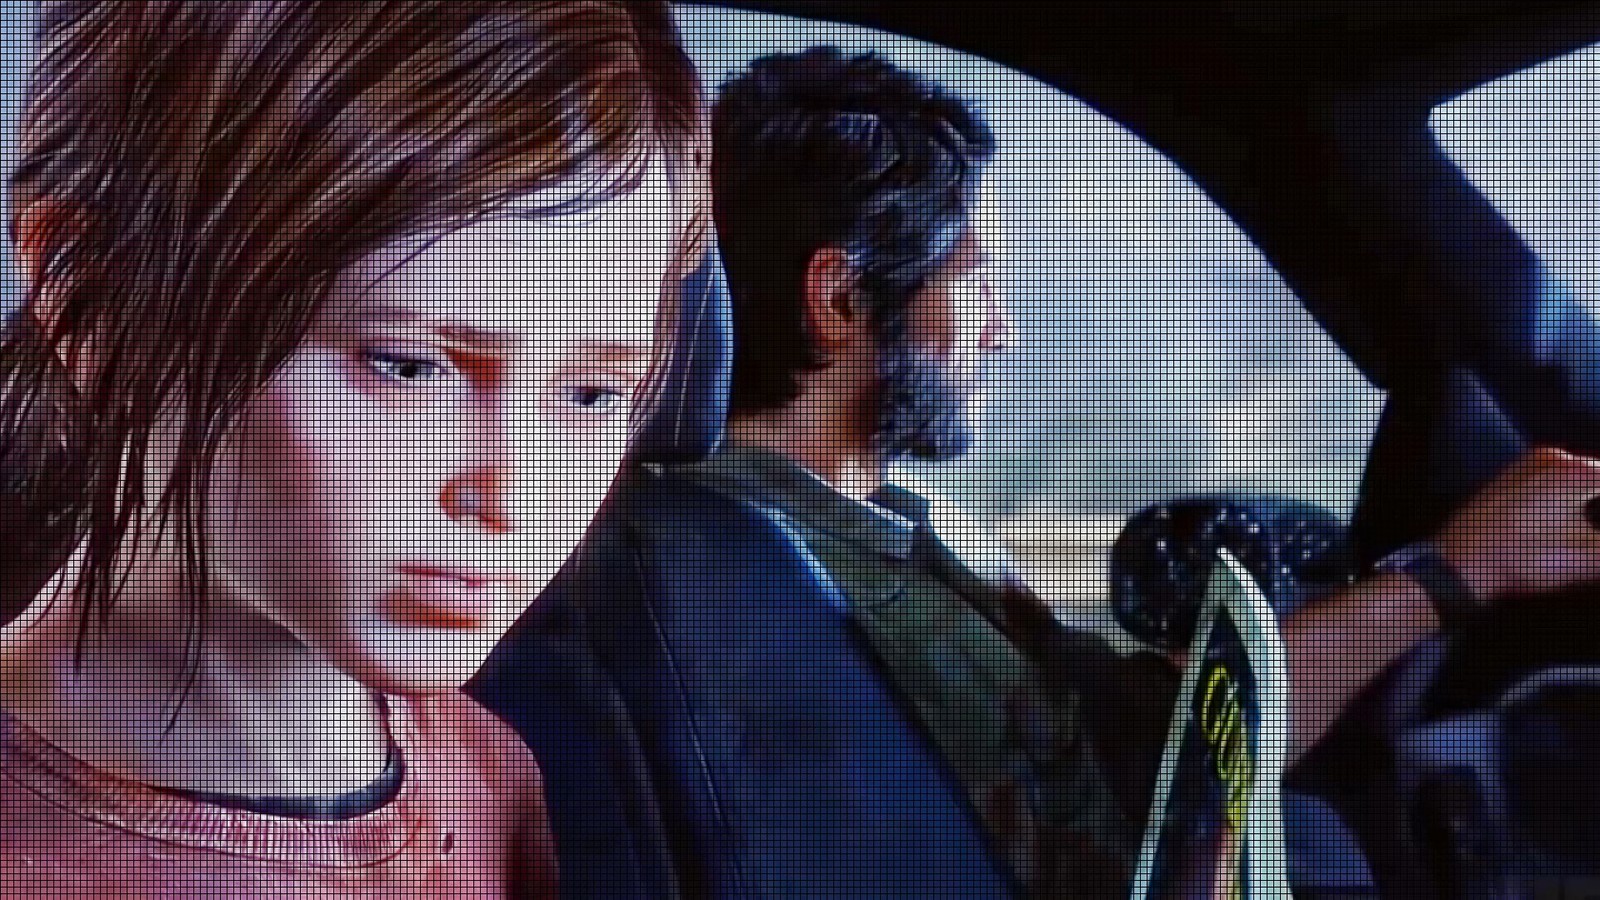 The Last of Us TV show is a massive critical hit